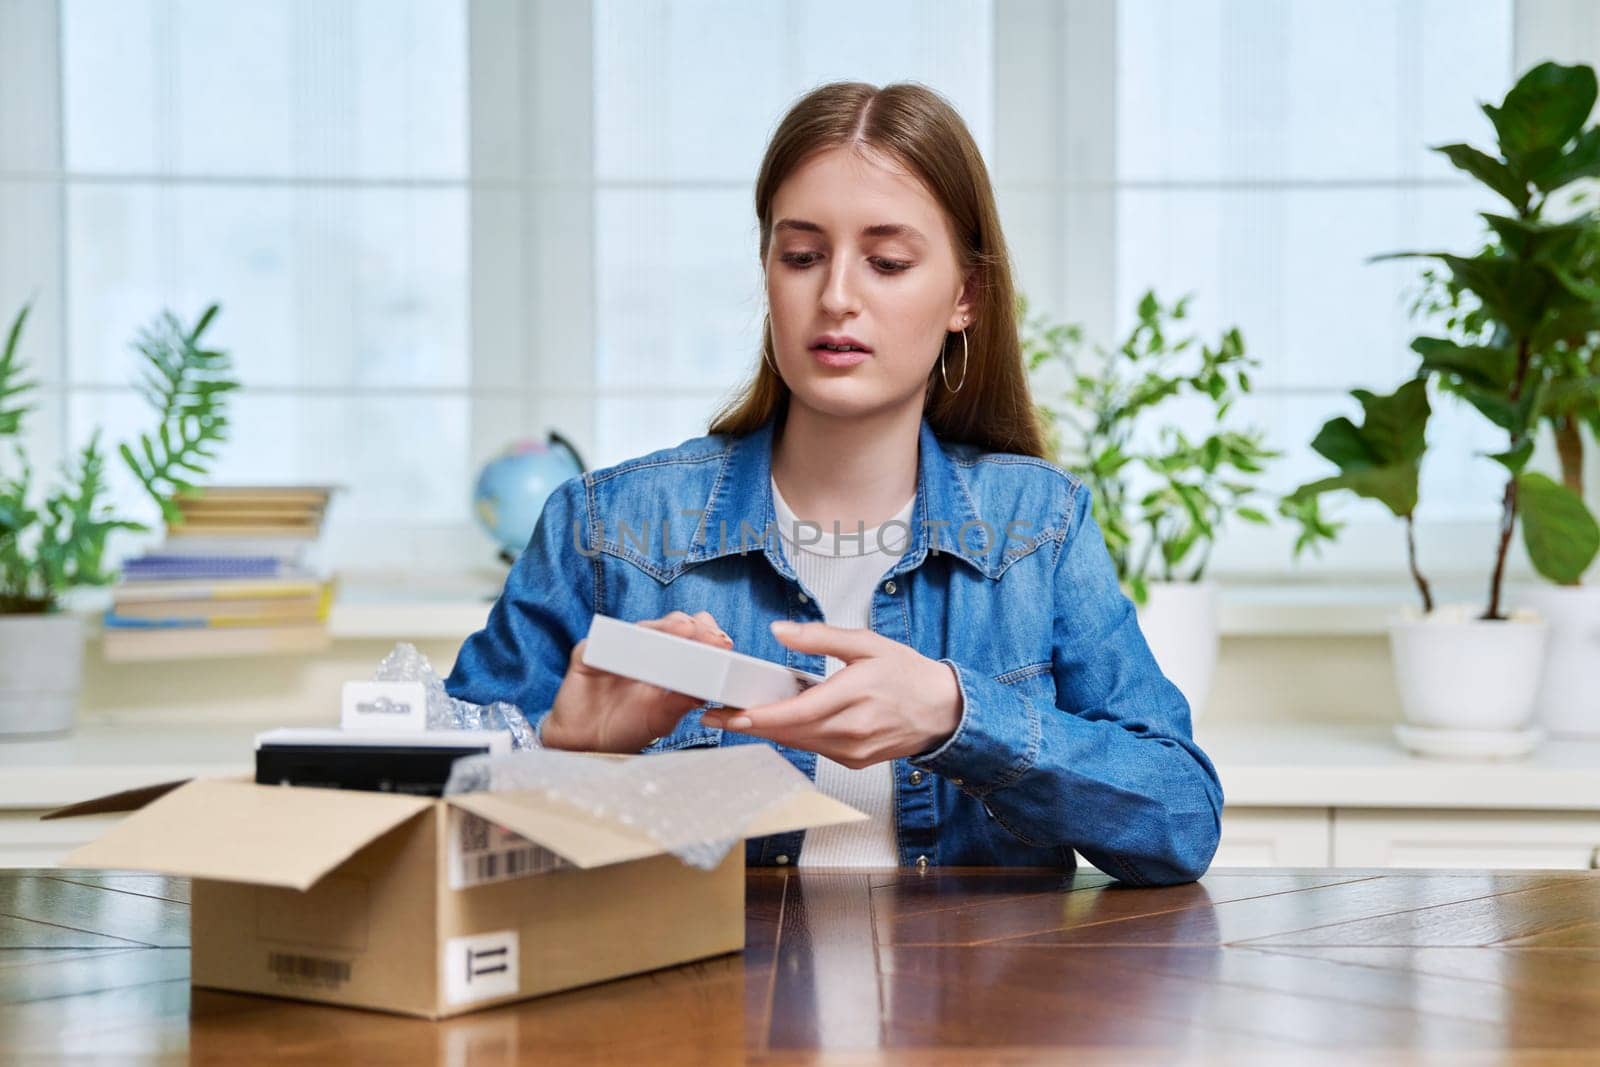 Satisfied young teen female shopper consumer sits at home and unpacks cardboard box with online purchases. Teenager girl unpacking box with new smartphone, headphones. Delivery by mail, online store